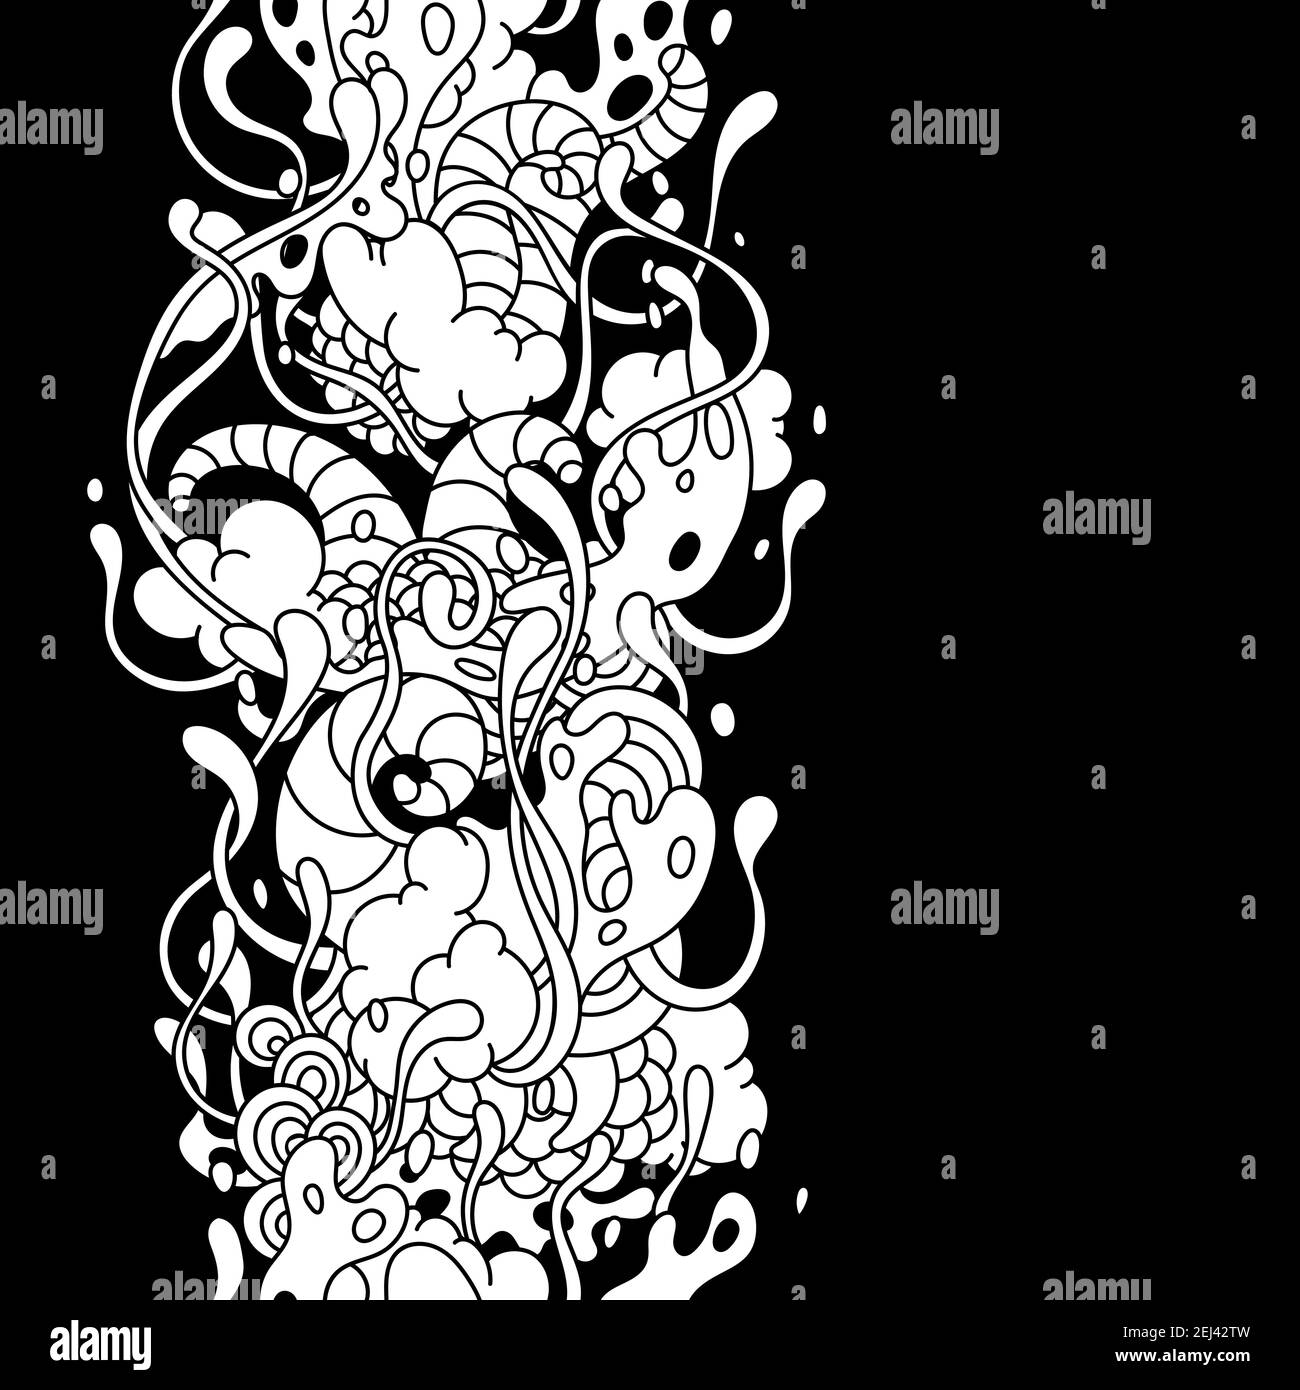 Seamless pattern with slime and tentacles. Stock Vector